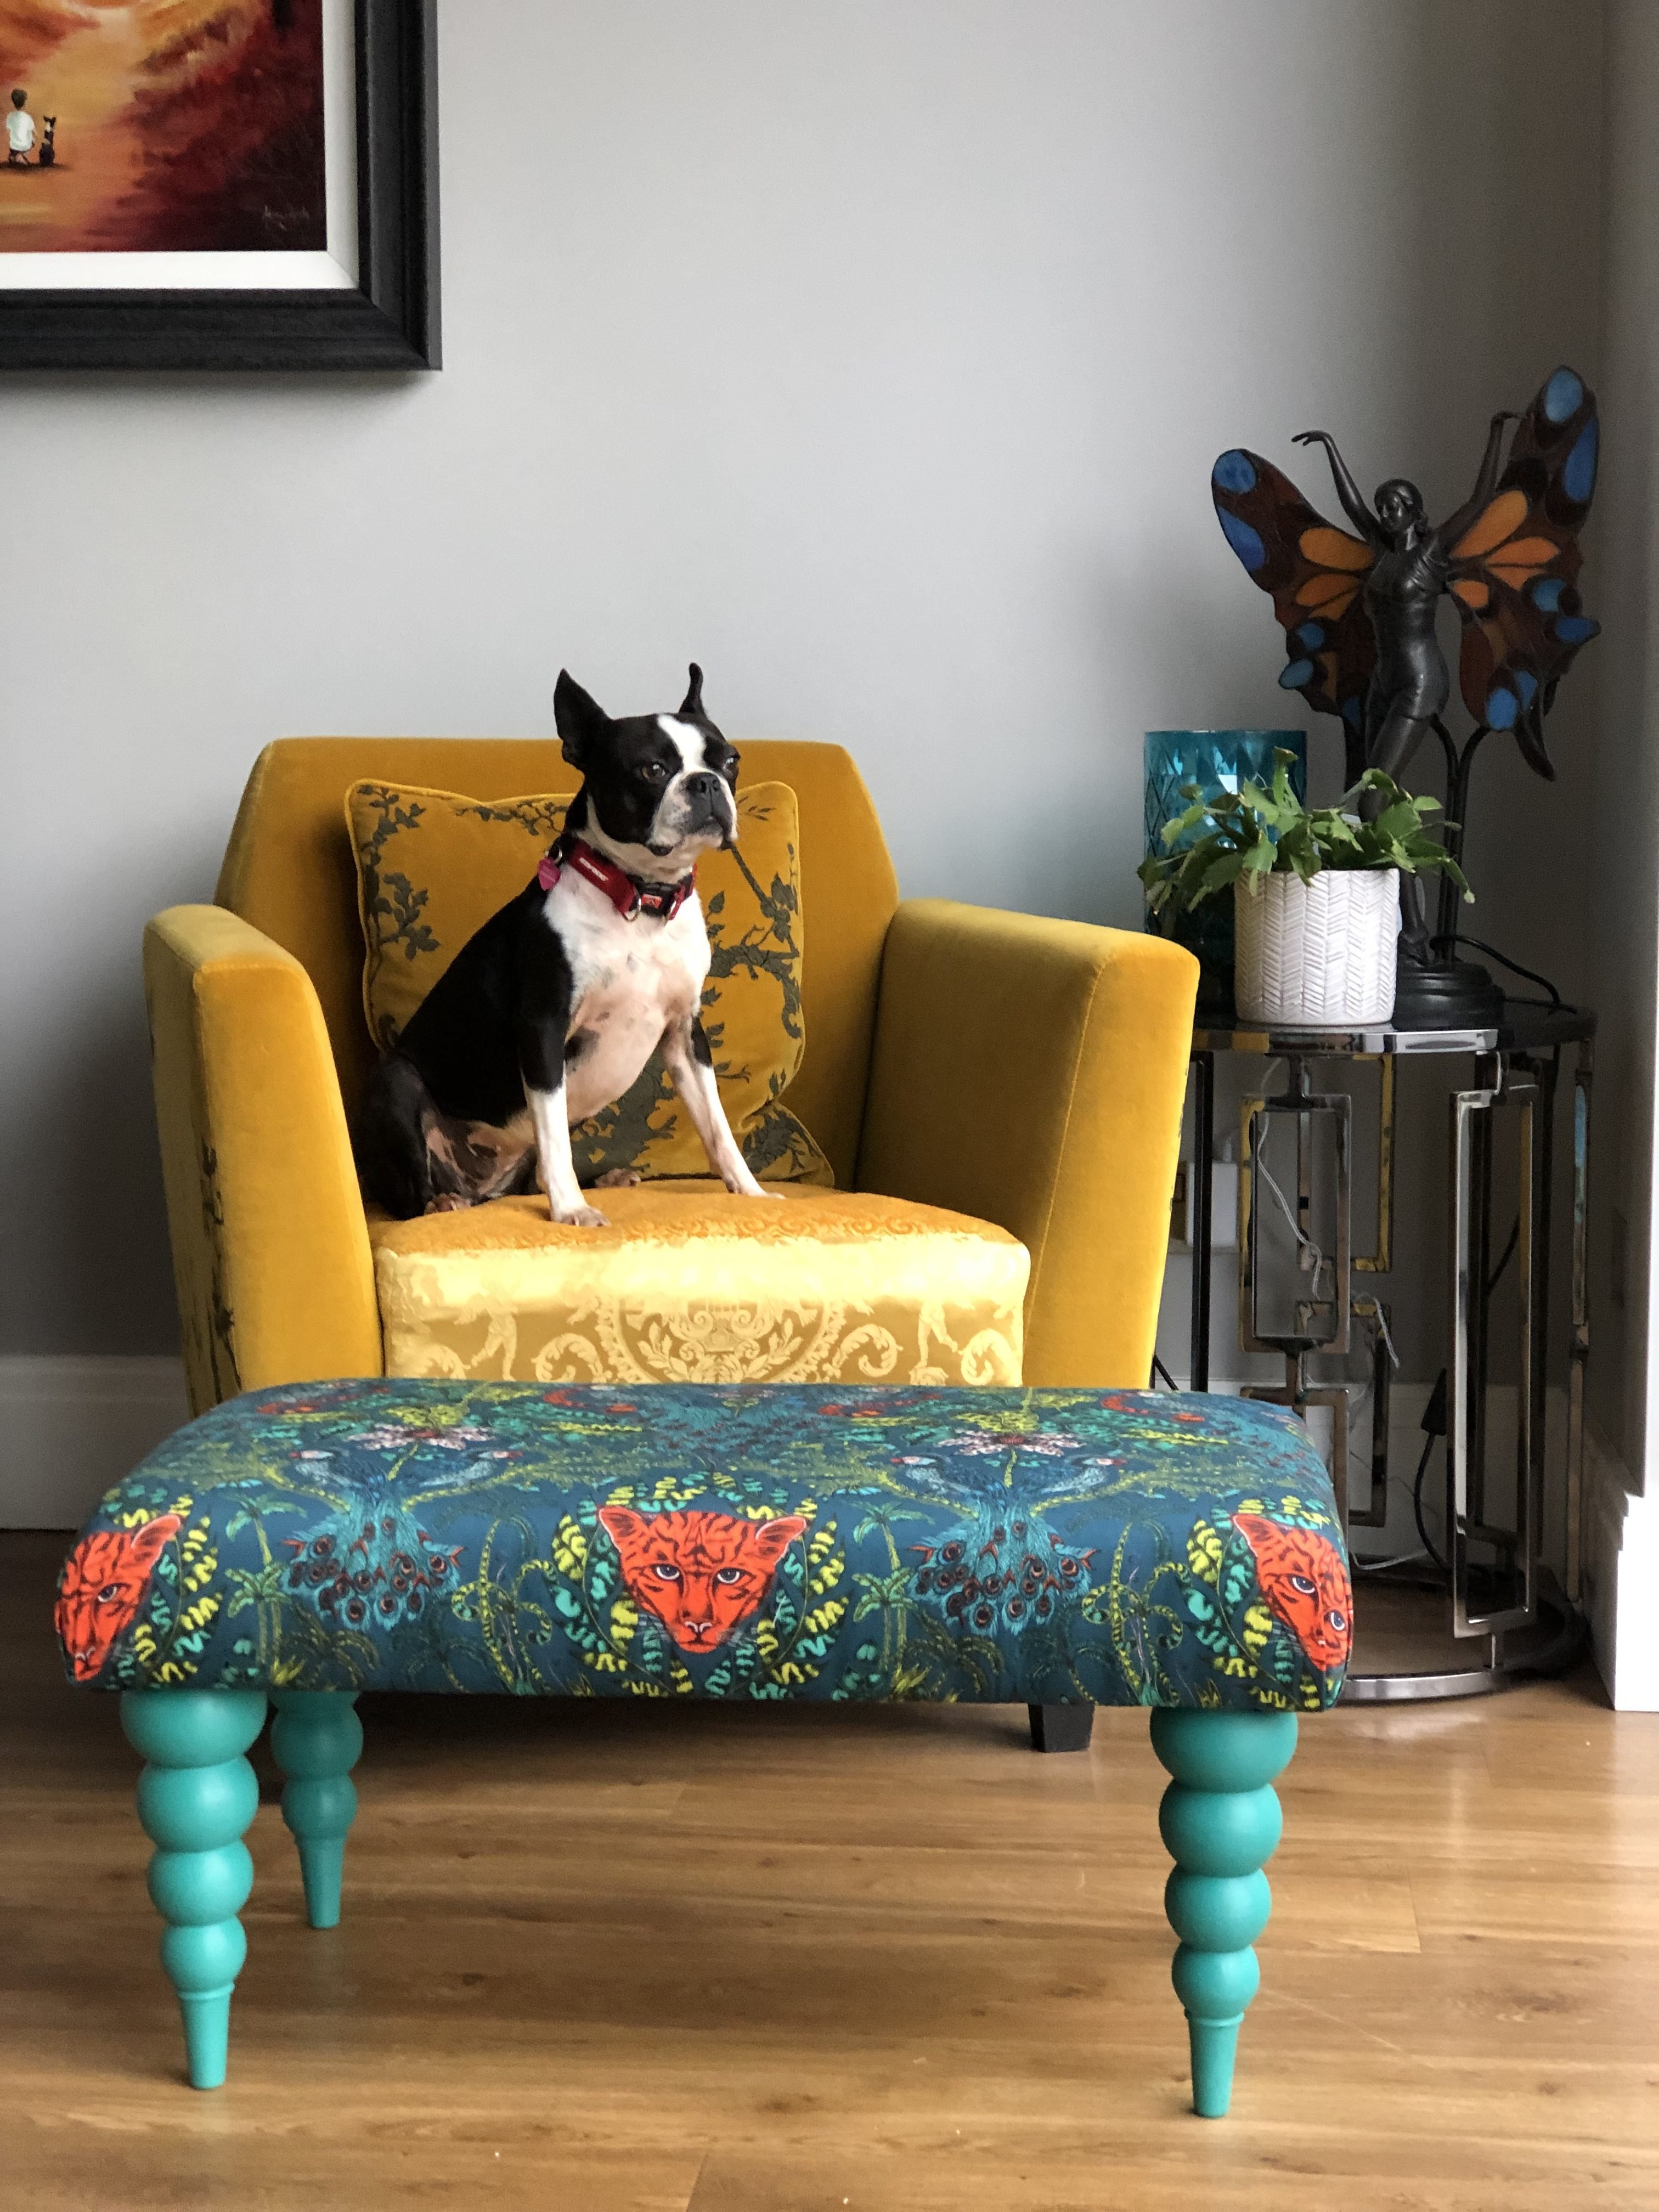 I recently tried making an upholstered footstool in Essex, I had been wanting to try some sort of upholstery course for a while. The footstool is bang on trend and chic for todays interior design and a perfect project to ease you in to upholstery and interior design